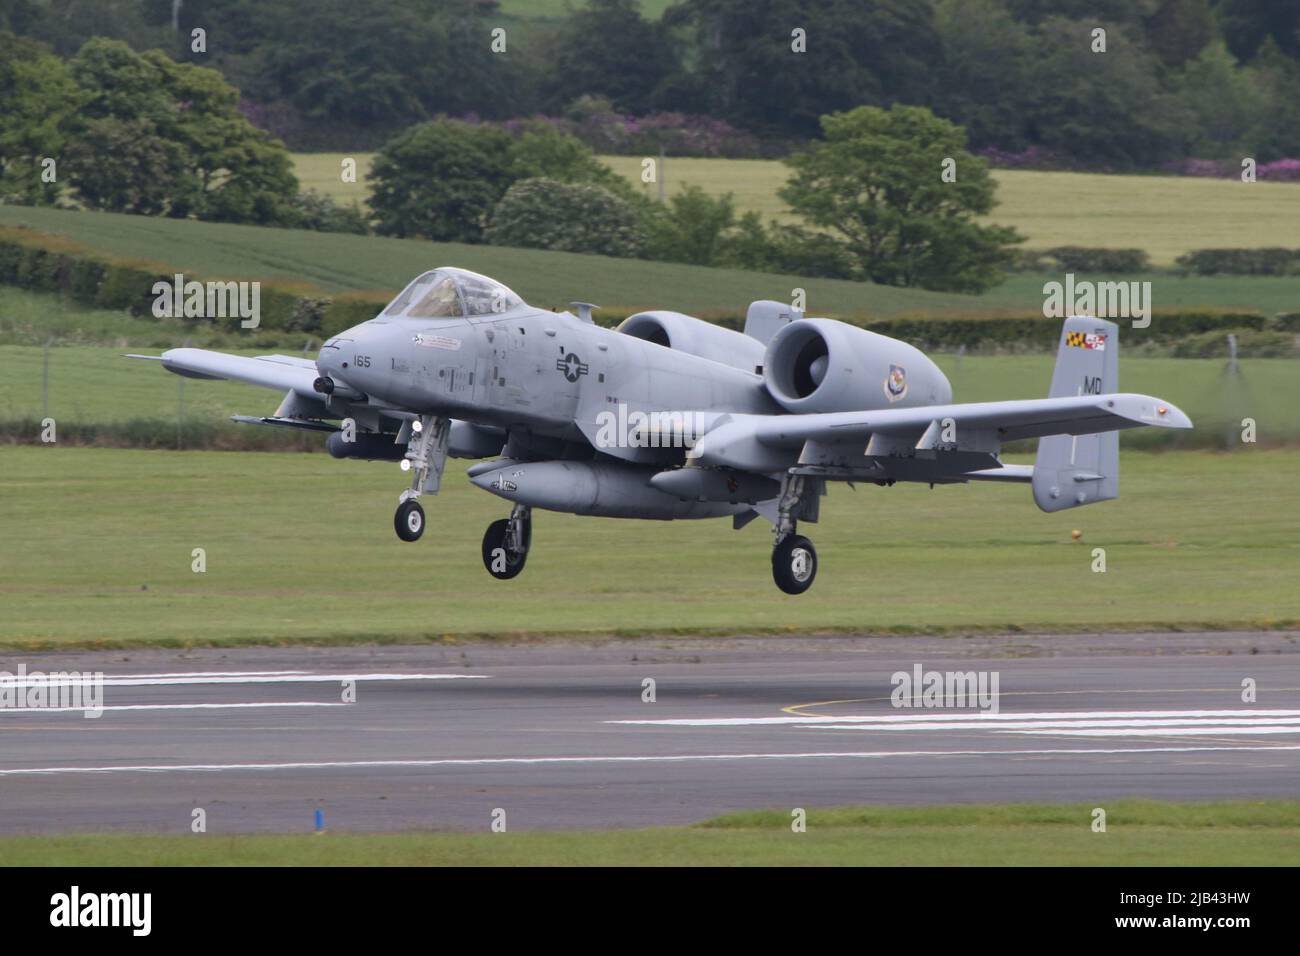 79-0165, a Fairchild Republic A-10C Thunderbolt II (or Warthog) operated by the 175th Wing of the Maryland Air National Guard of the United States Air Force, arriving at Prestwick International Airport in Ayrshire. The aircraft was one of ten A-10Cs routing through Prestwick on their journey from Latvia back to the USA, after participating in Exercise Swift Response. Stock Photo